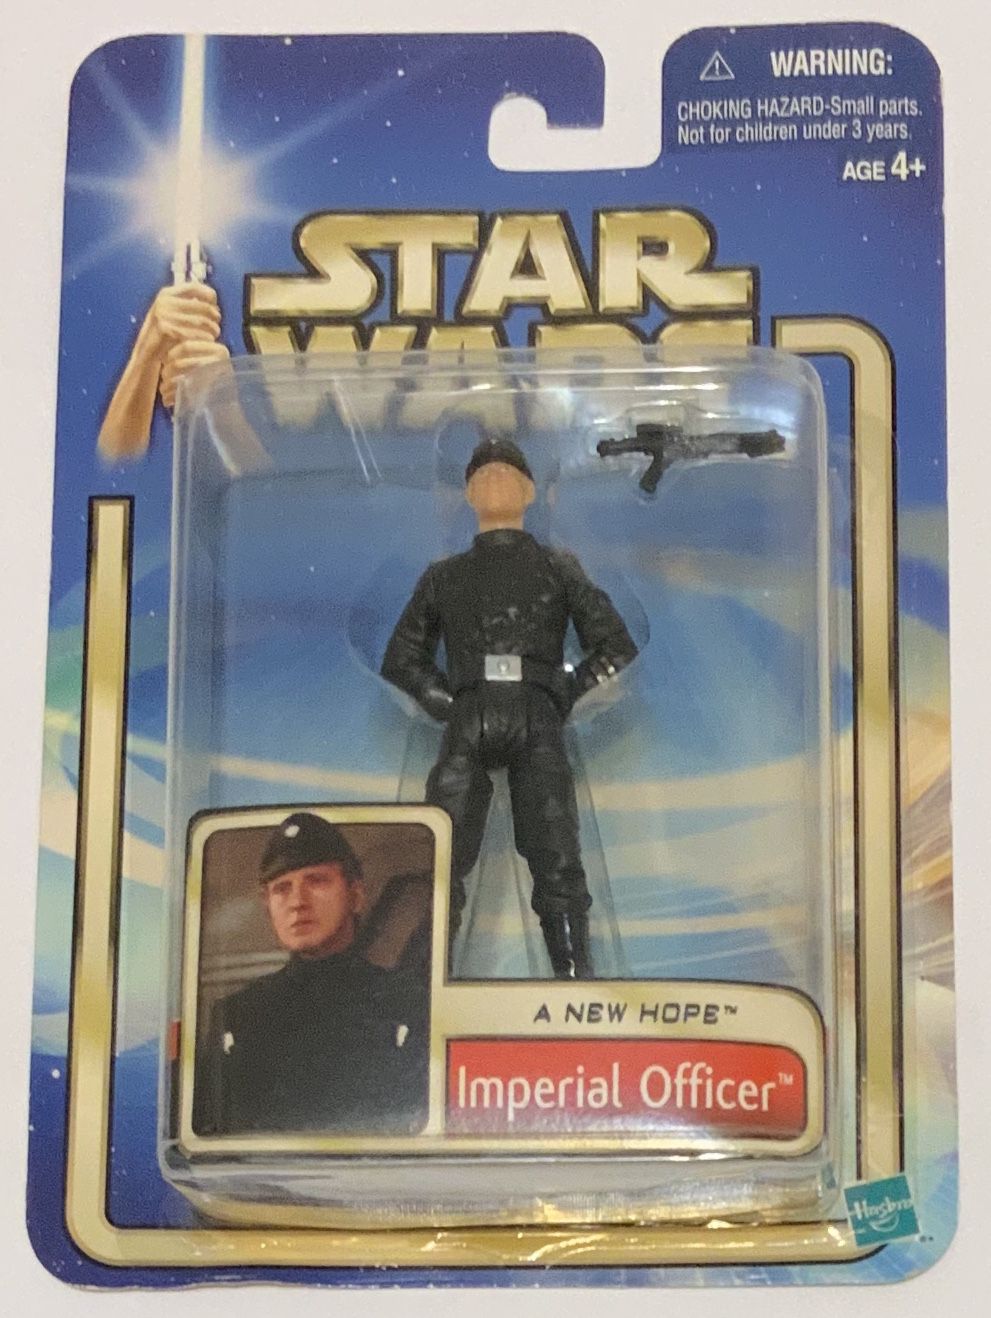 Star Wars A New Hope Imperial Officer 4 Inch Action Figure Hasbro 2002